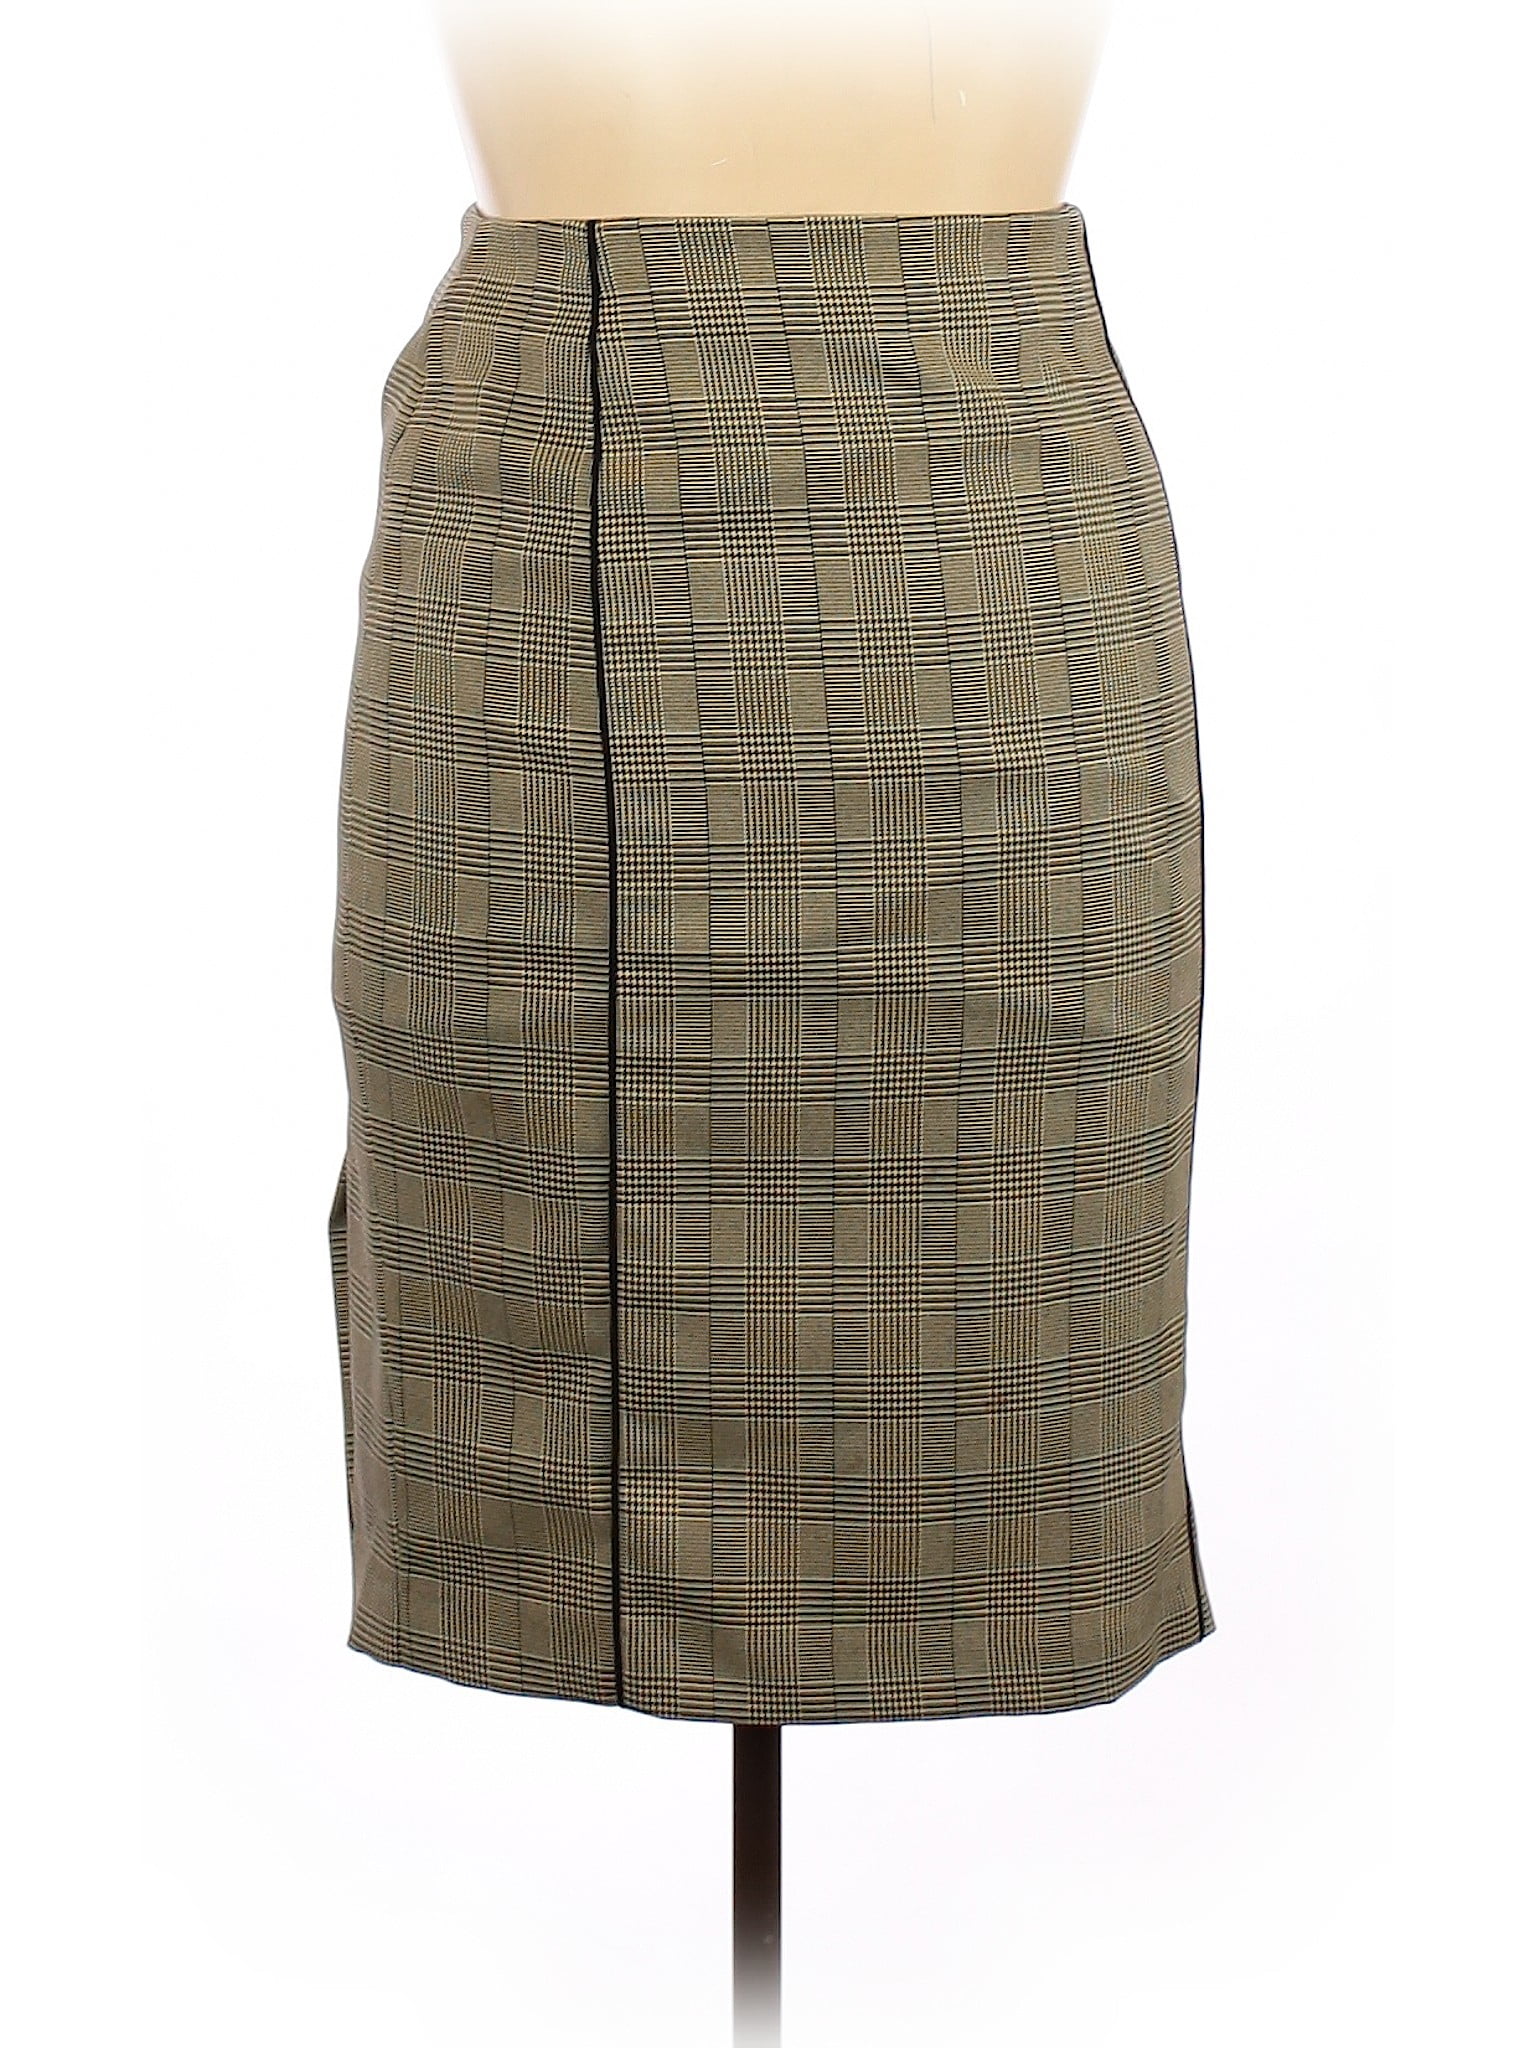 Evan Picone - Pre-Owned Evan Picone Women's Size 18 Plus Casual Skirt ...